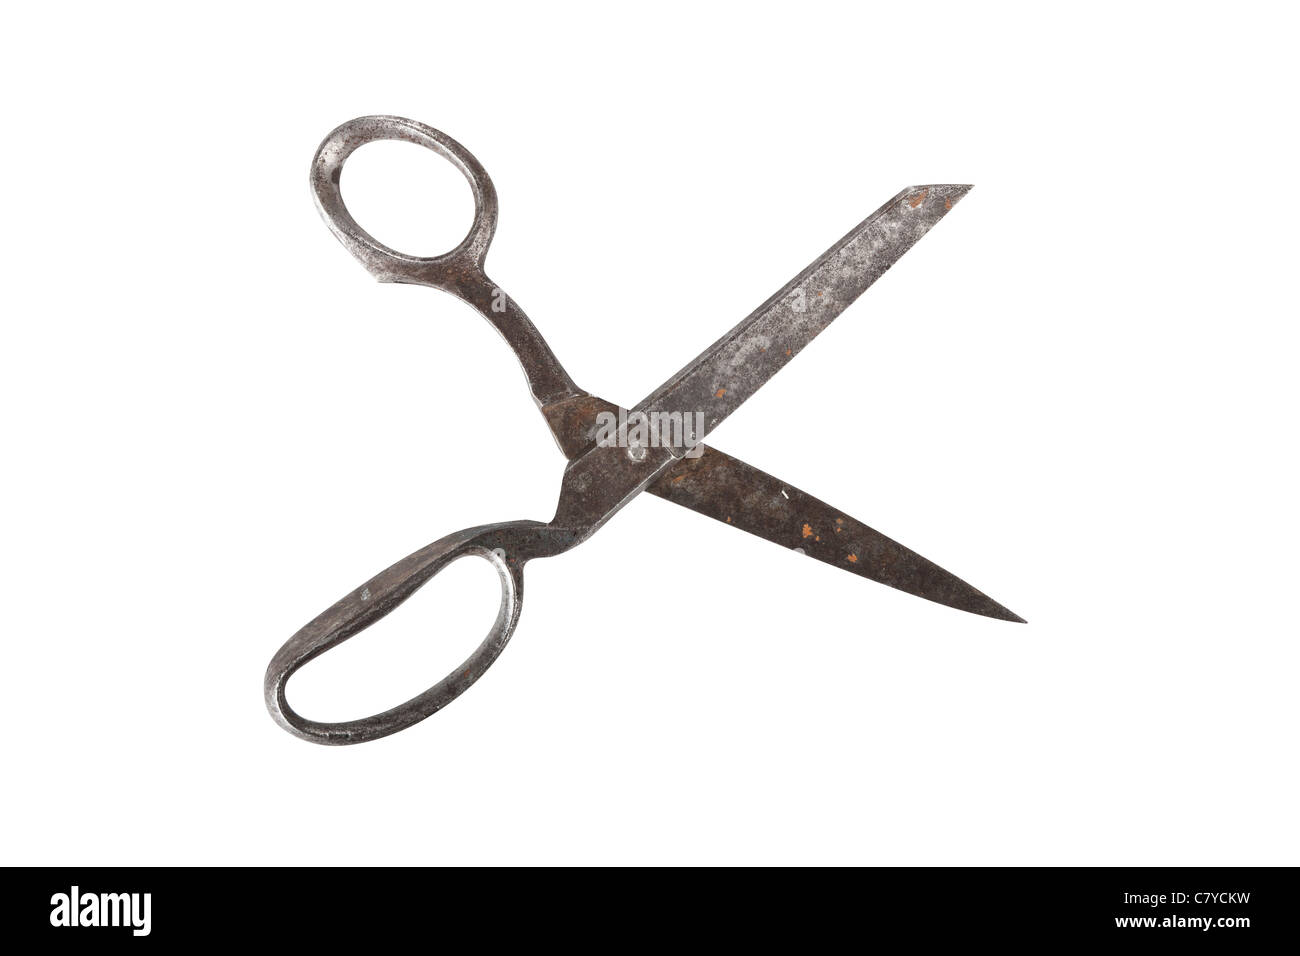 Vintage scissors isolated on white background with clipping path Stock Photo